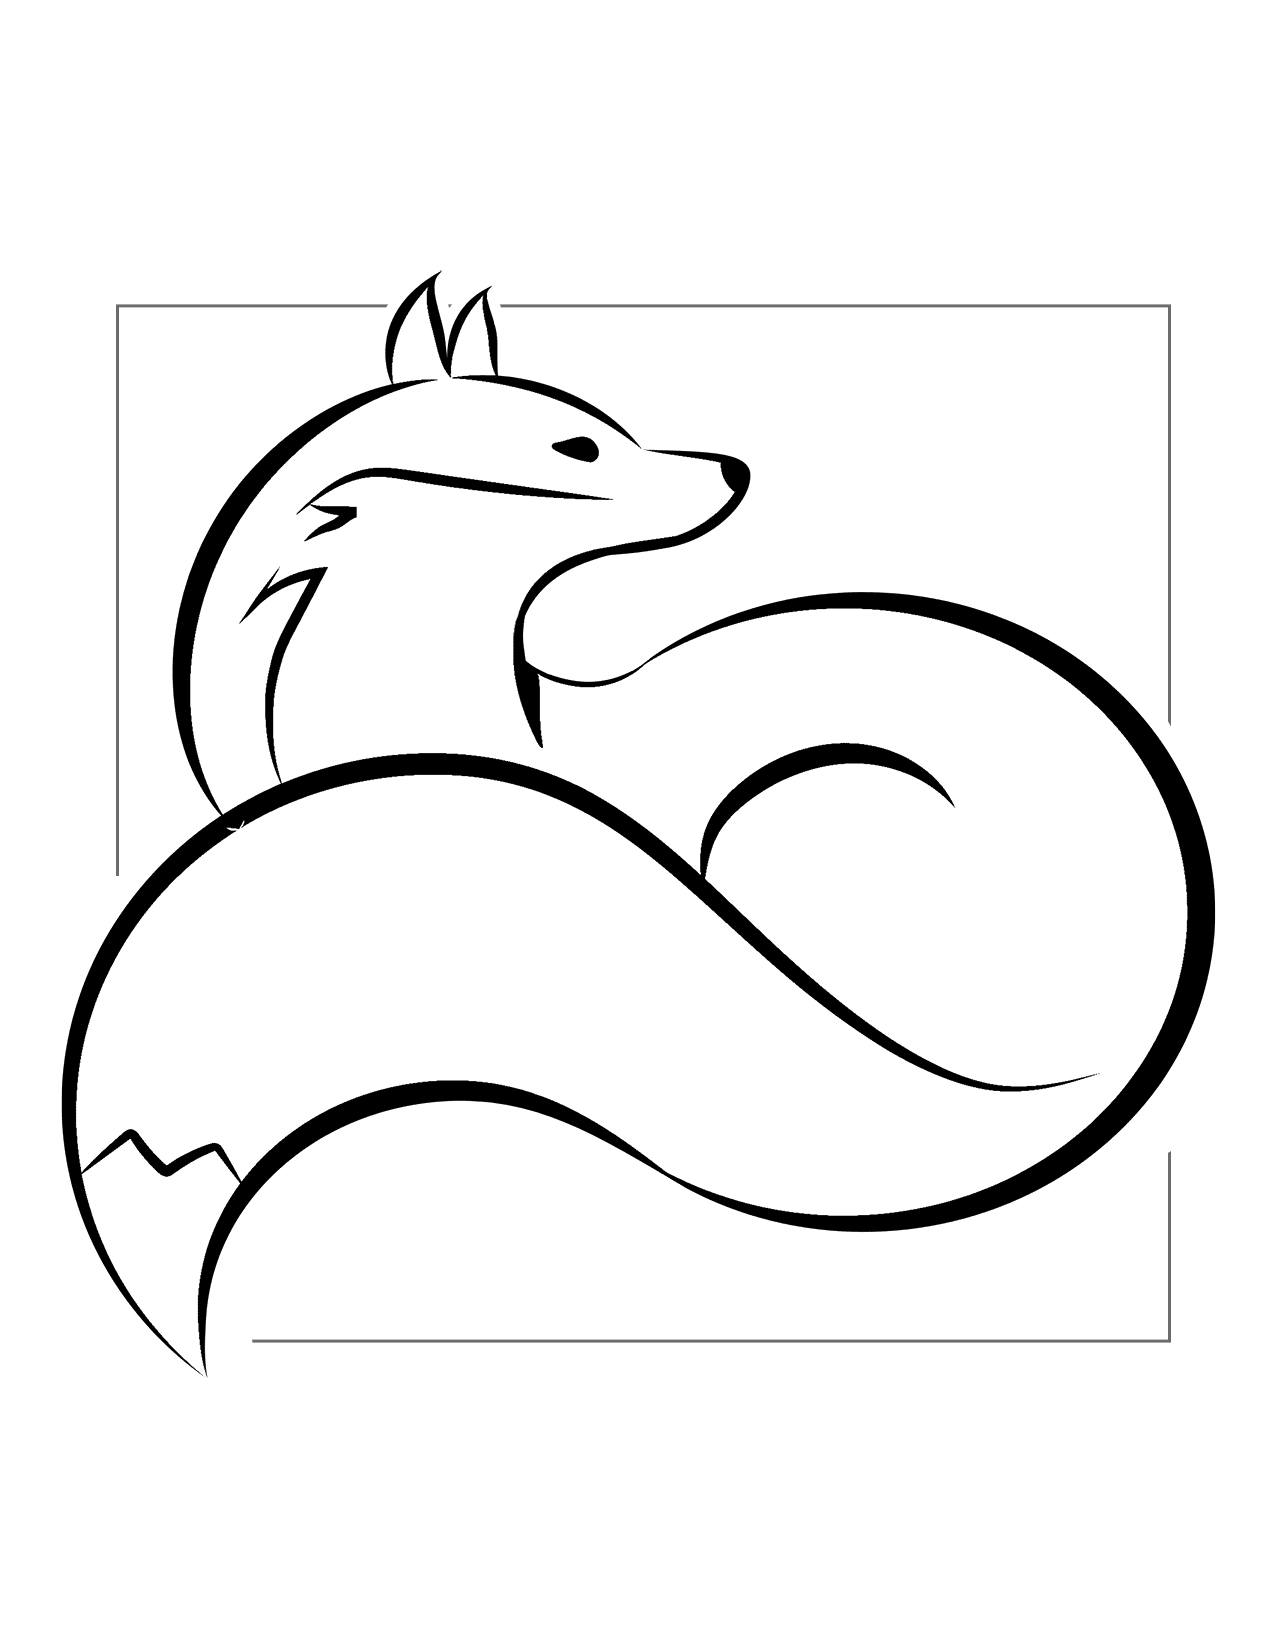 Fox Art Coloring Page